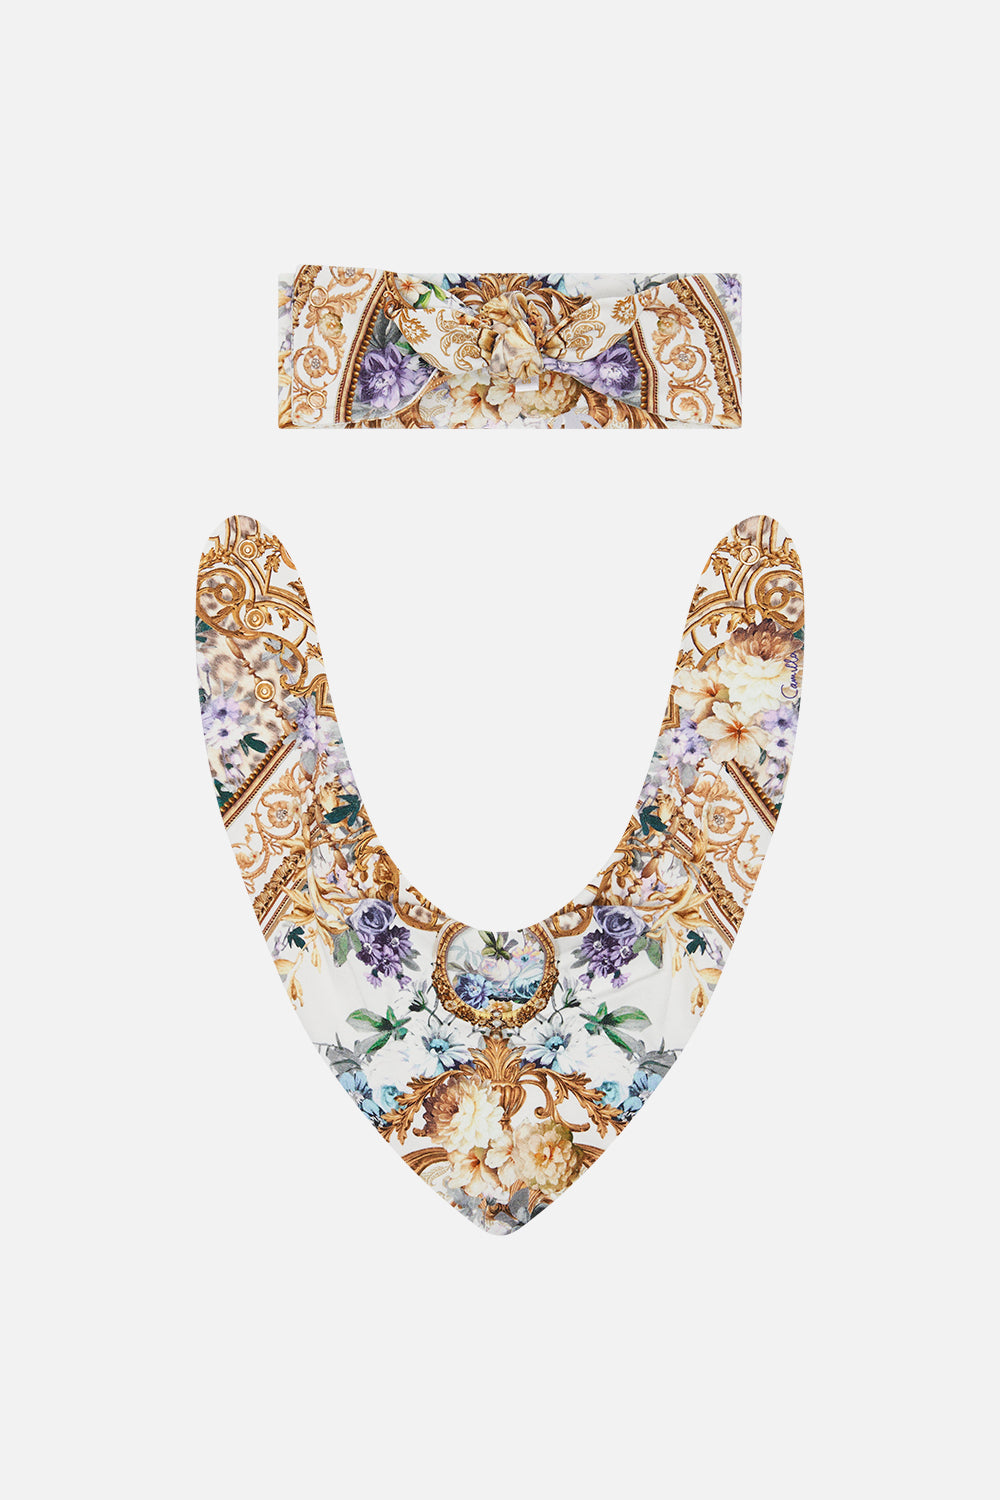 Product view of Milla By CAMILLA  Babies bib det in Palazzo Play Date print